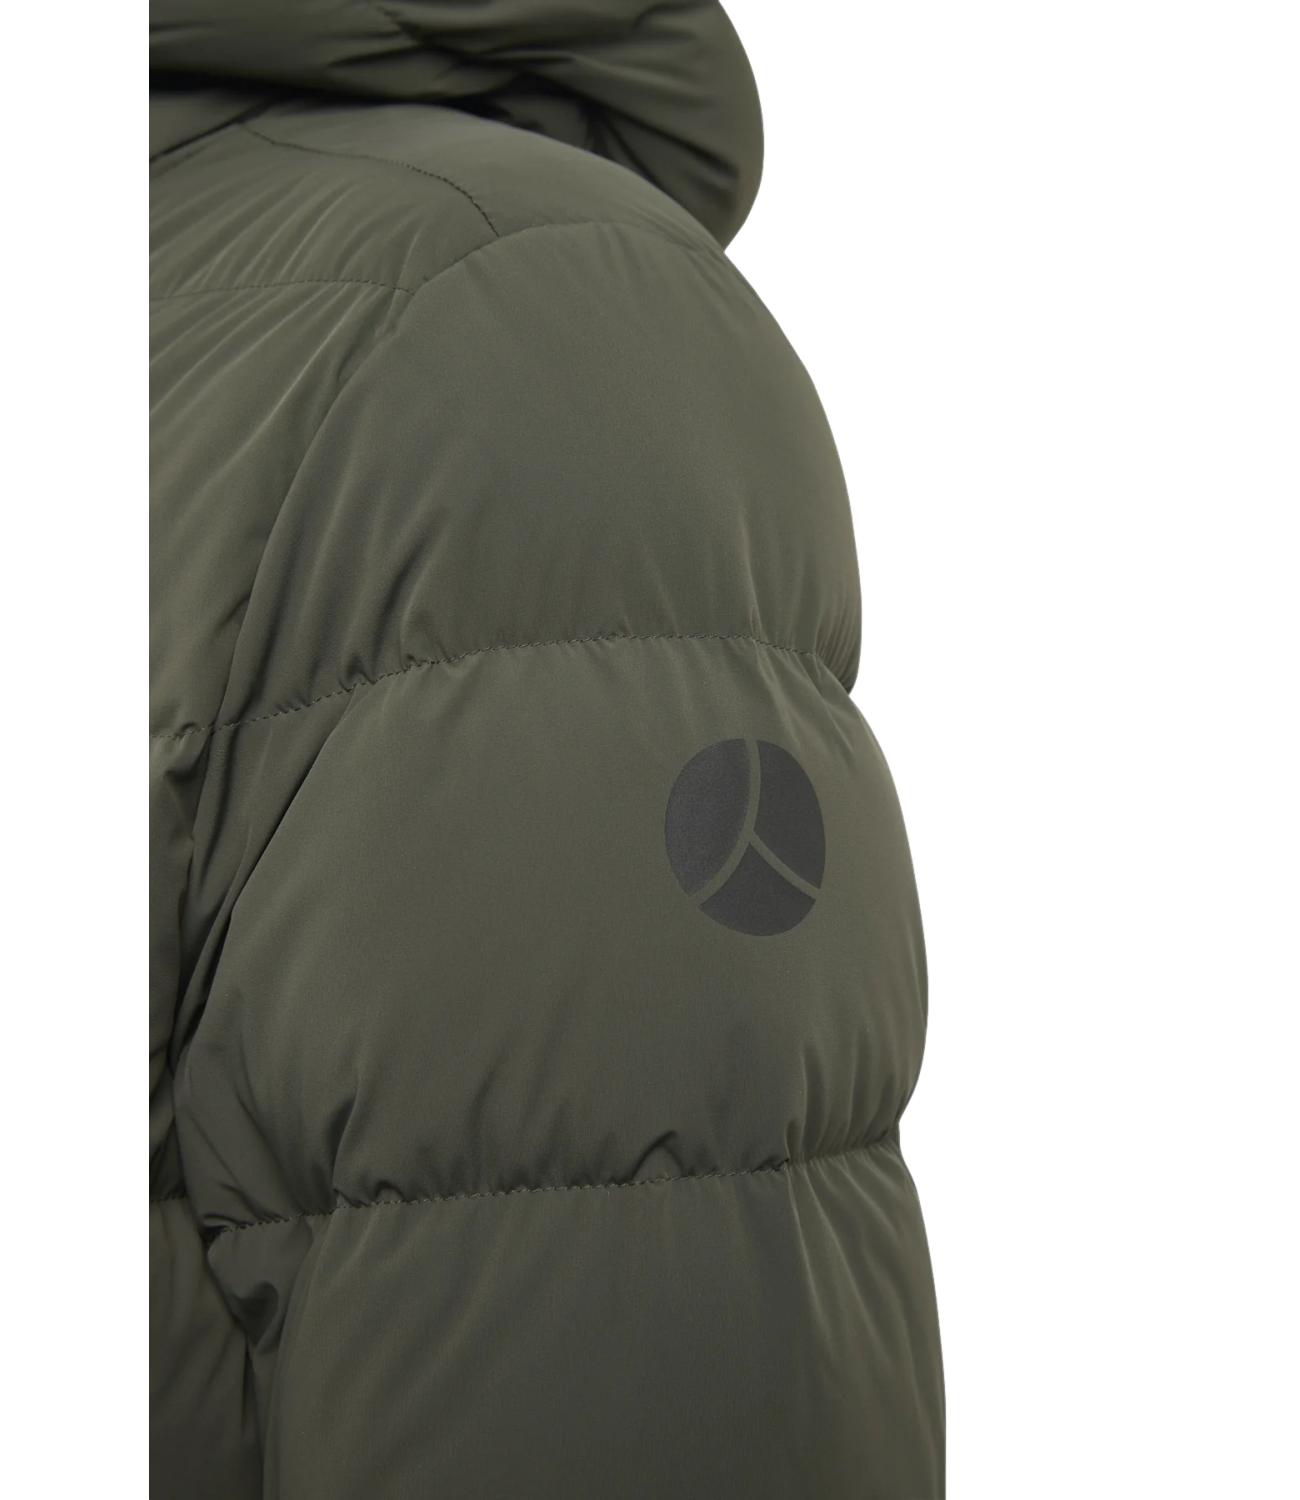 Baka down jacket in soft touch technical nylon with military green lakké effect nylon interior for men